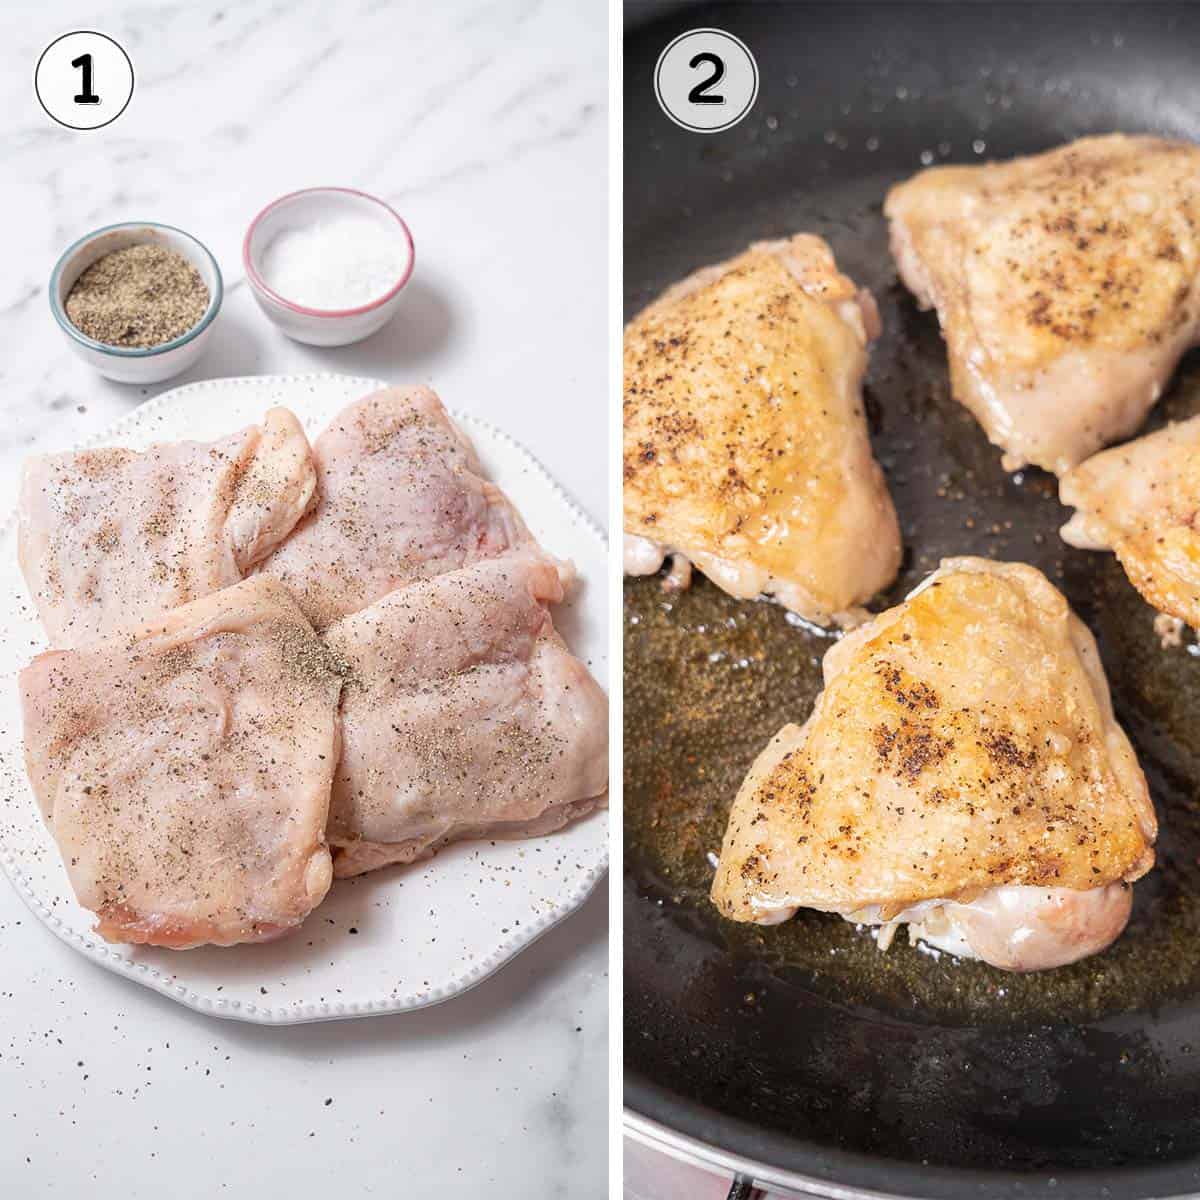 seasoning the chicken and browning it in a pan.